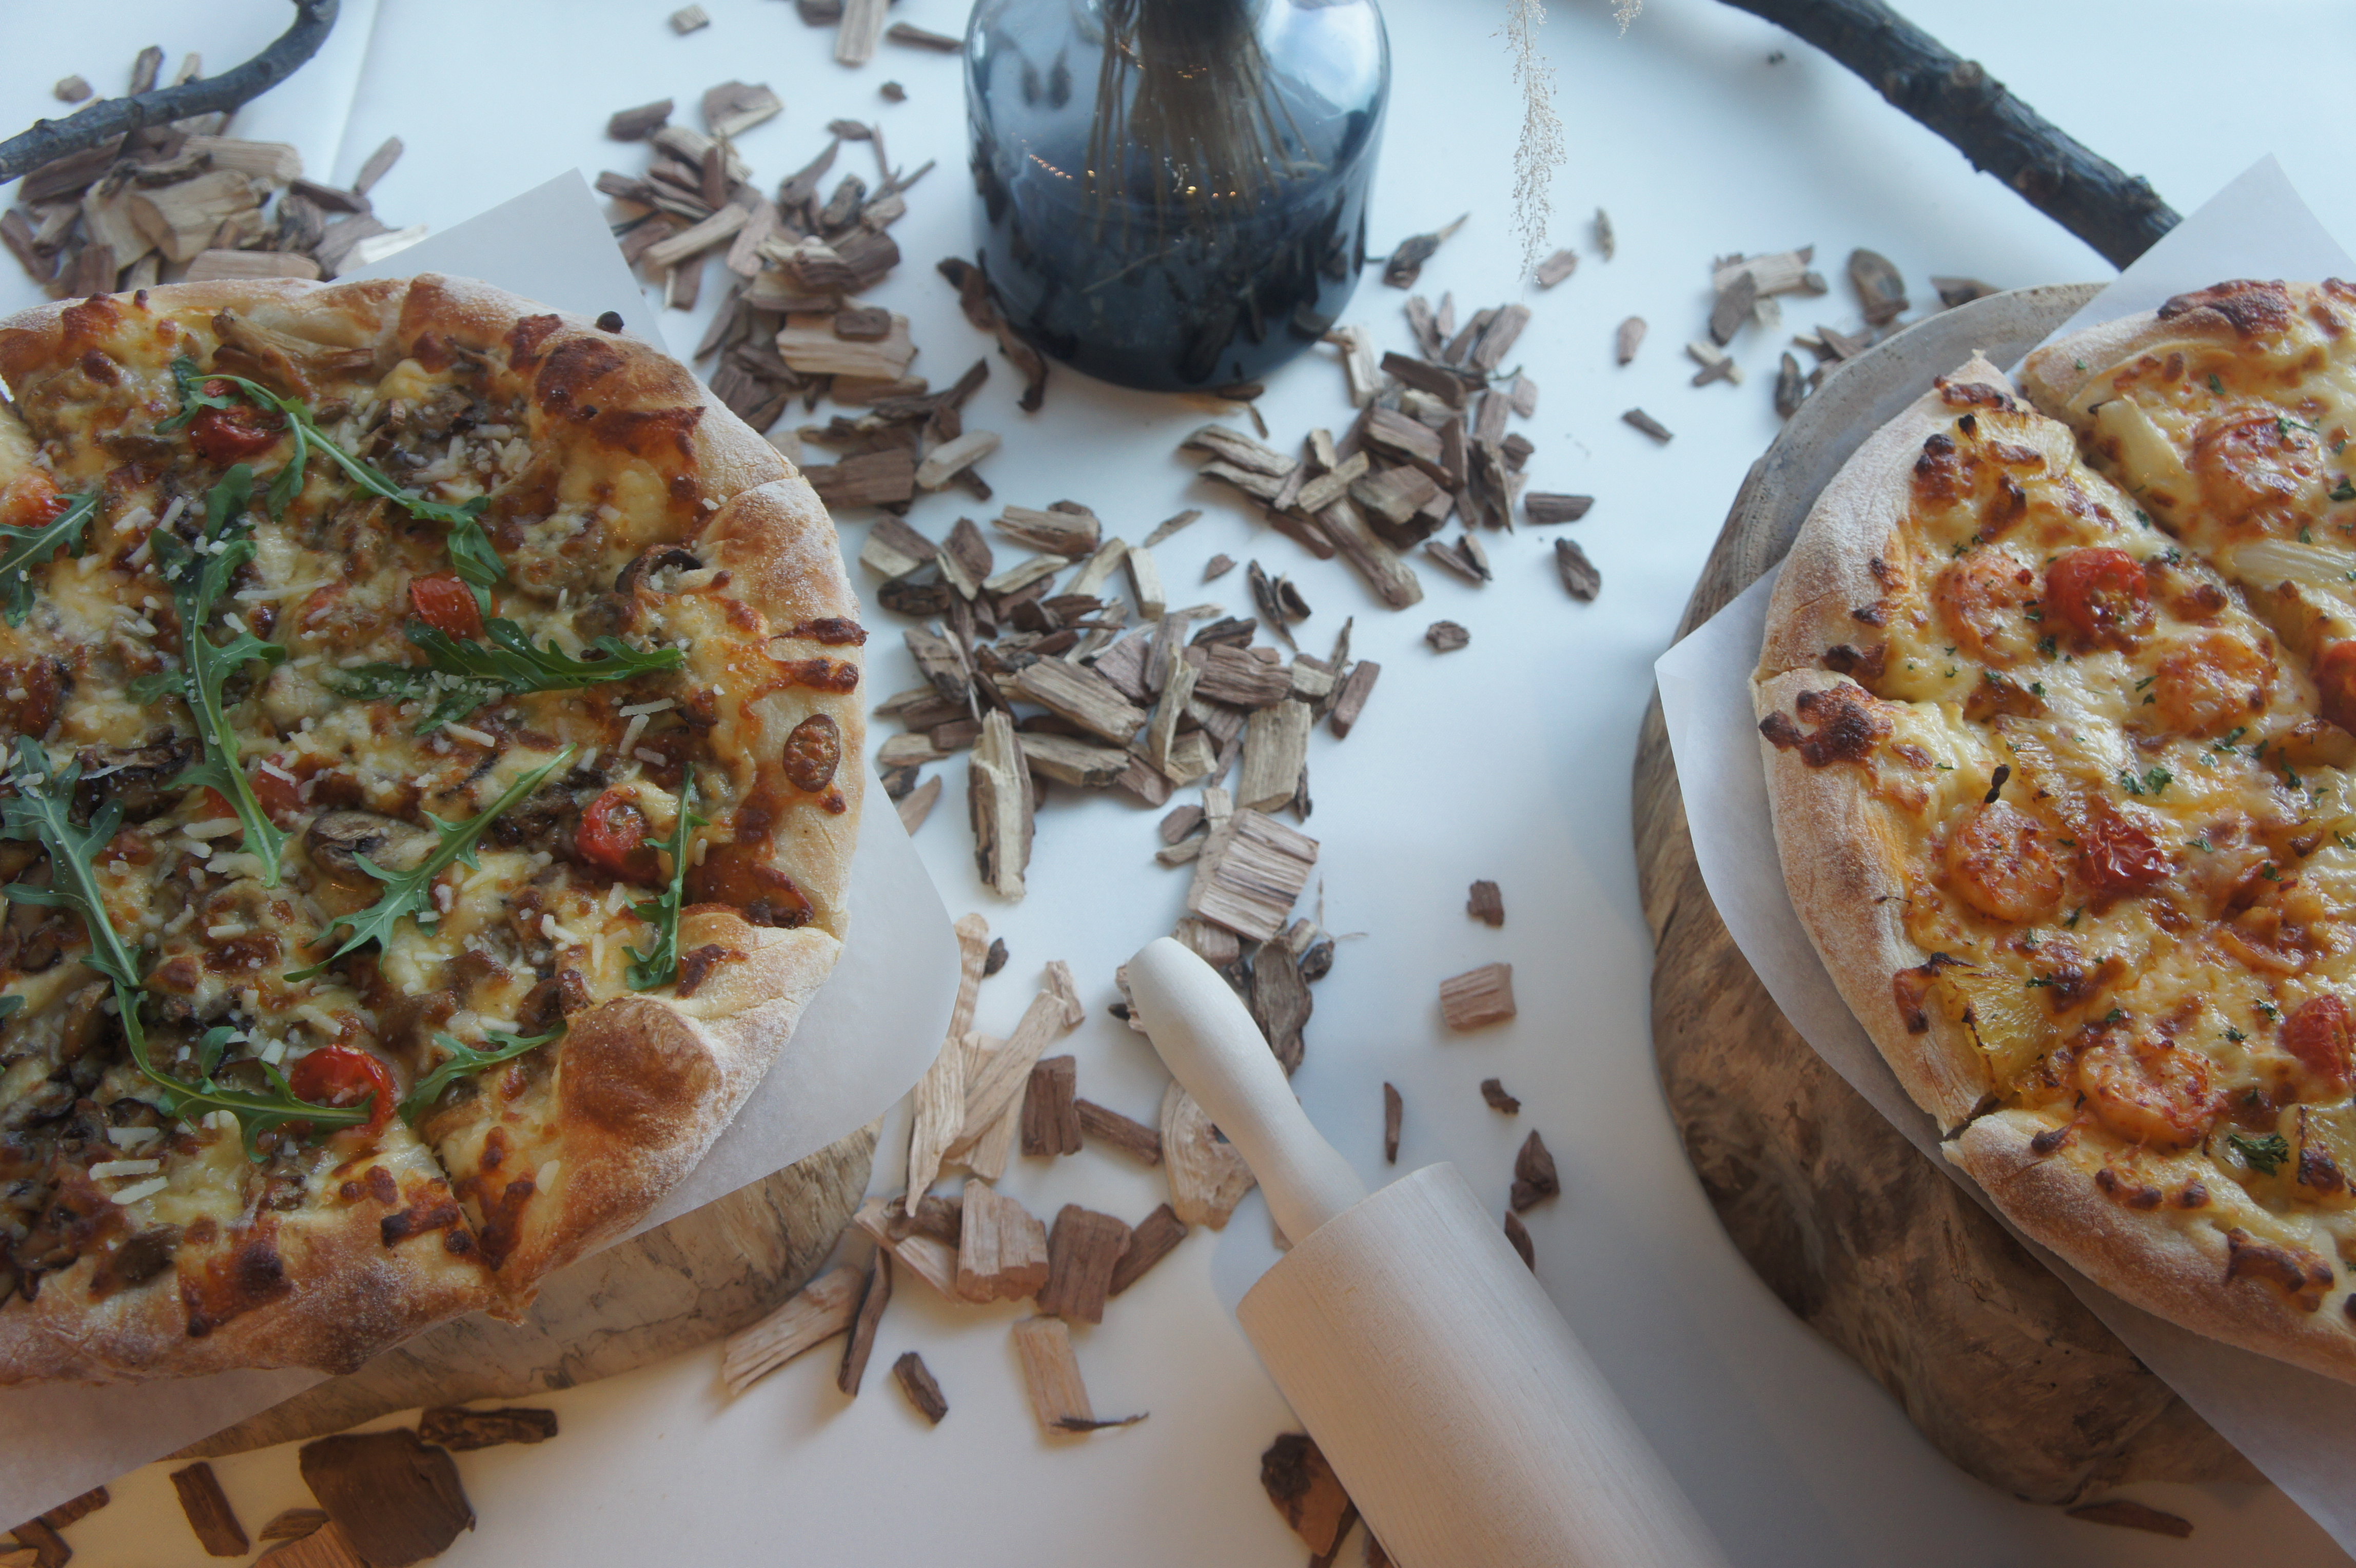 Pizza Hut debuts new Light x Airy Crust, toppings, and dining concept at PLQ Mall - Alvinology